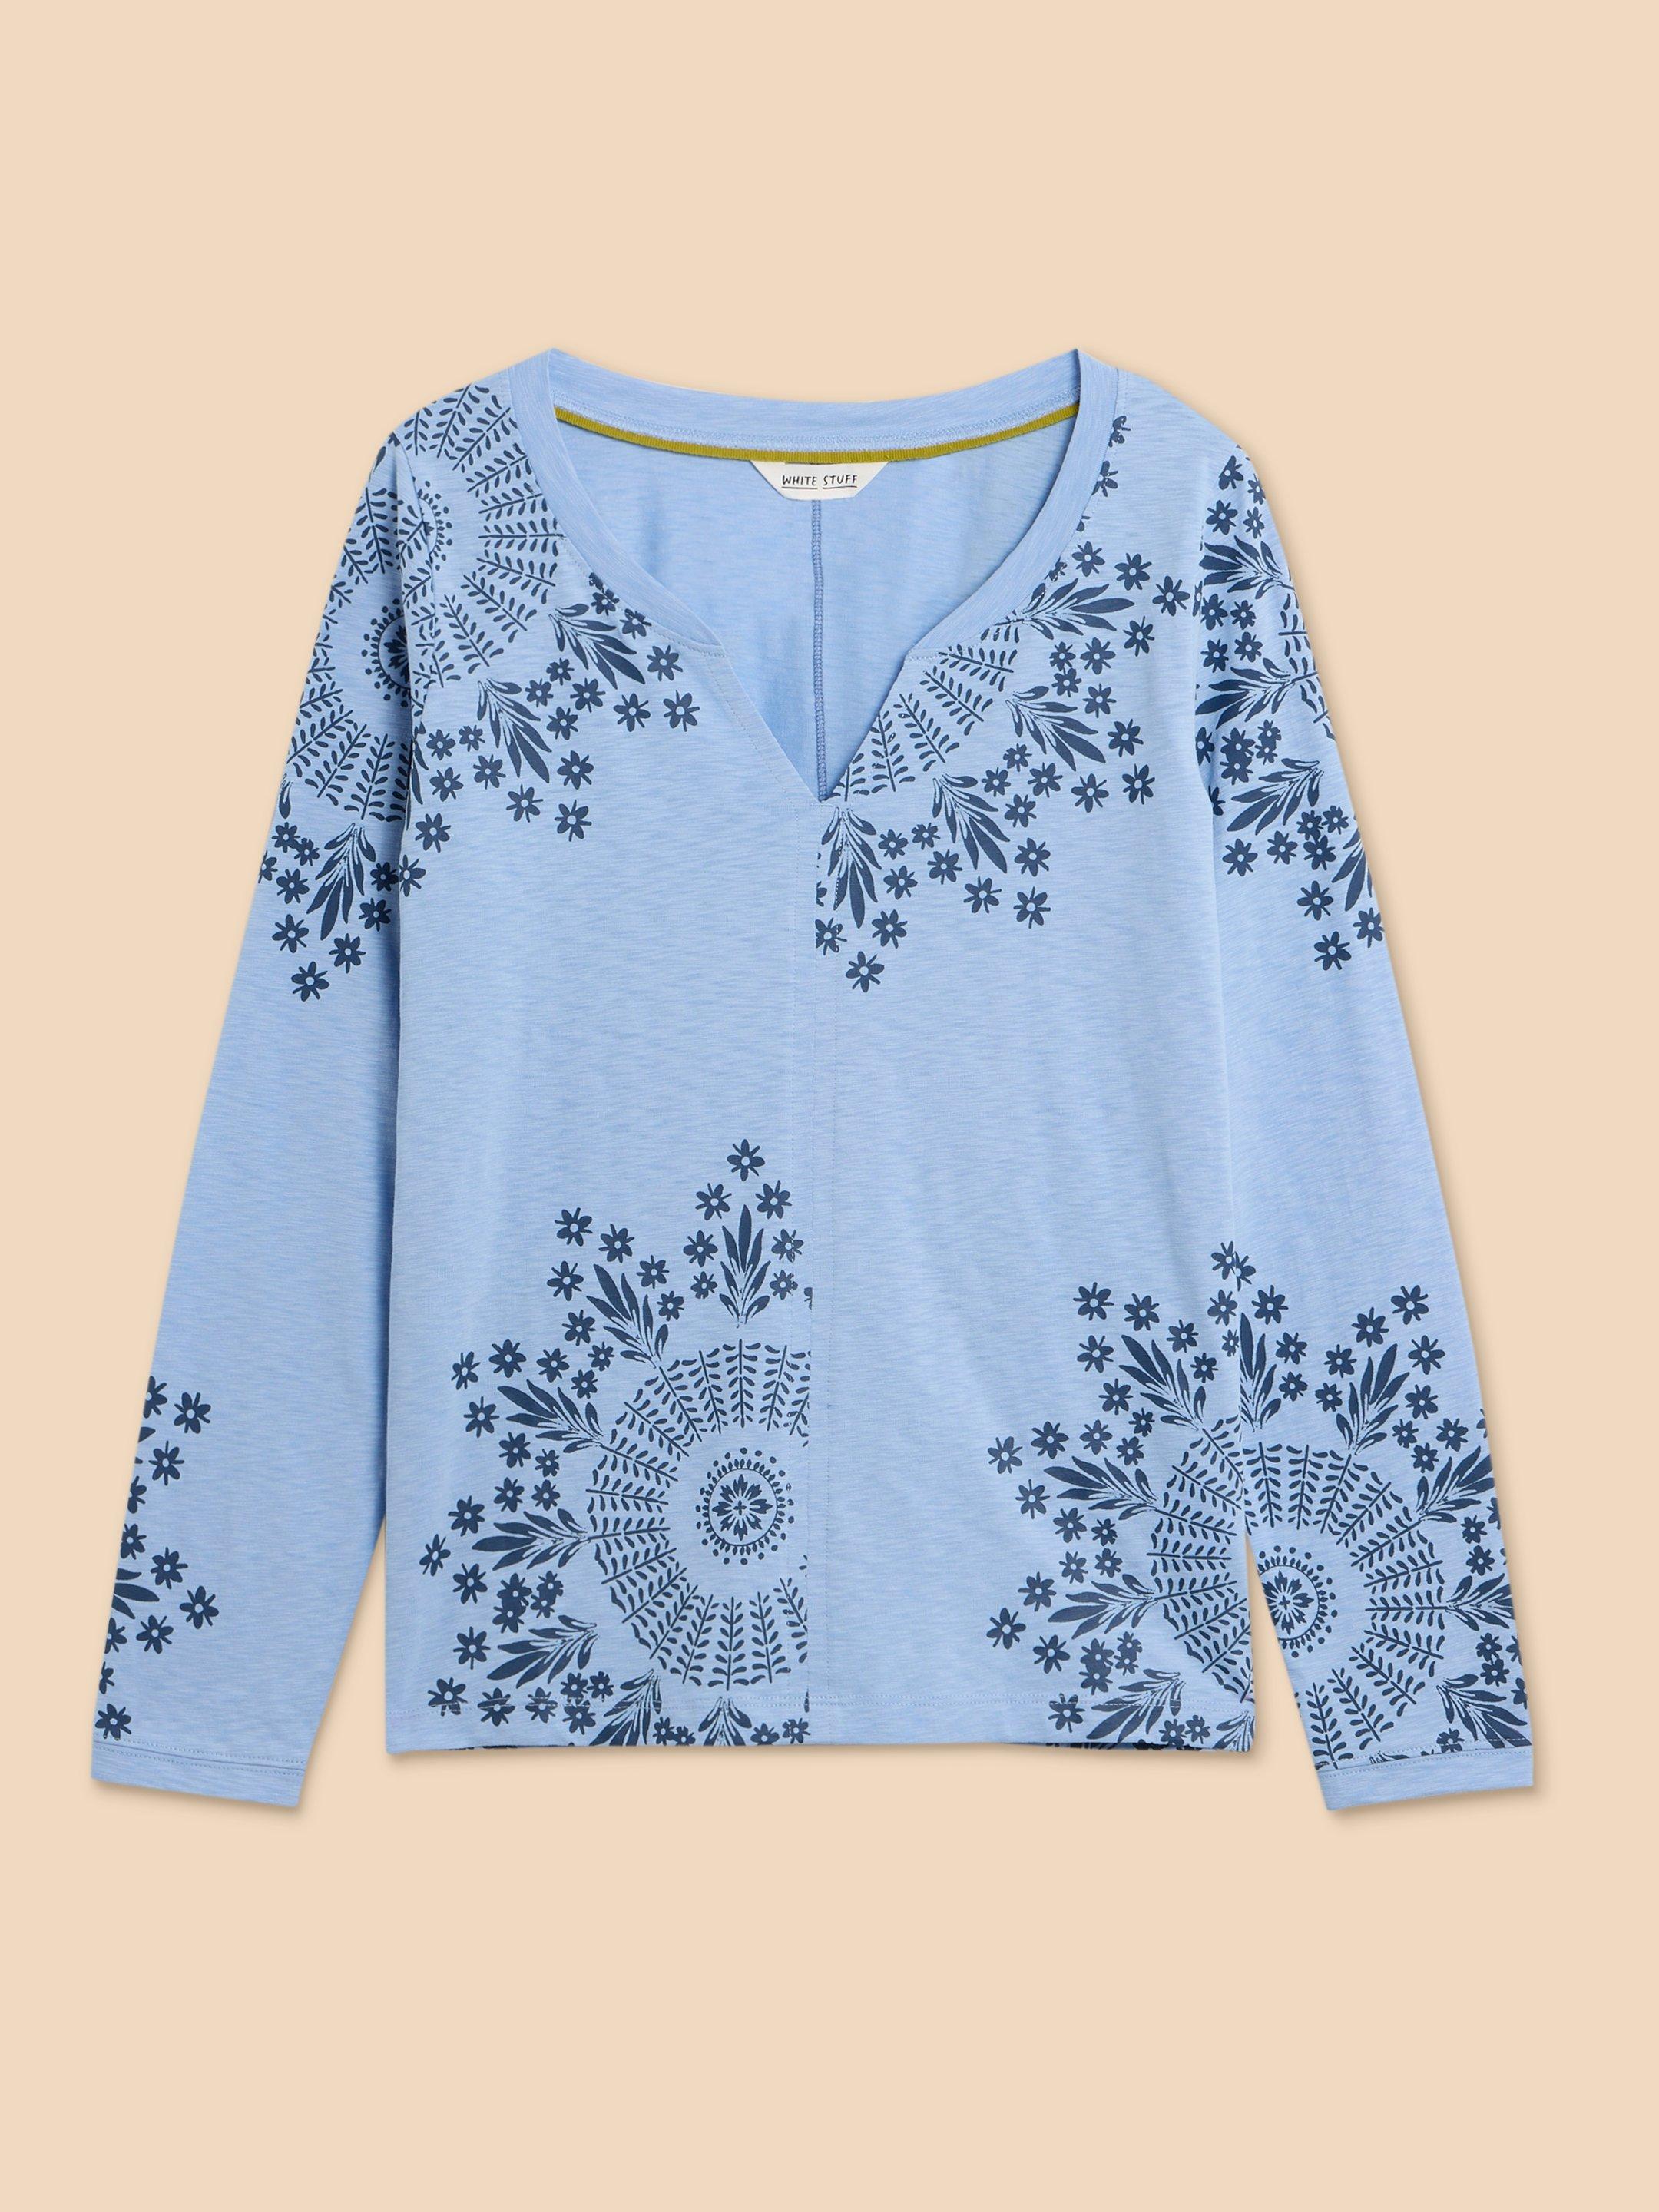 NELLY LS PRINTED TEE in BLUE MLT - FLAT FRONT